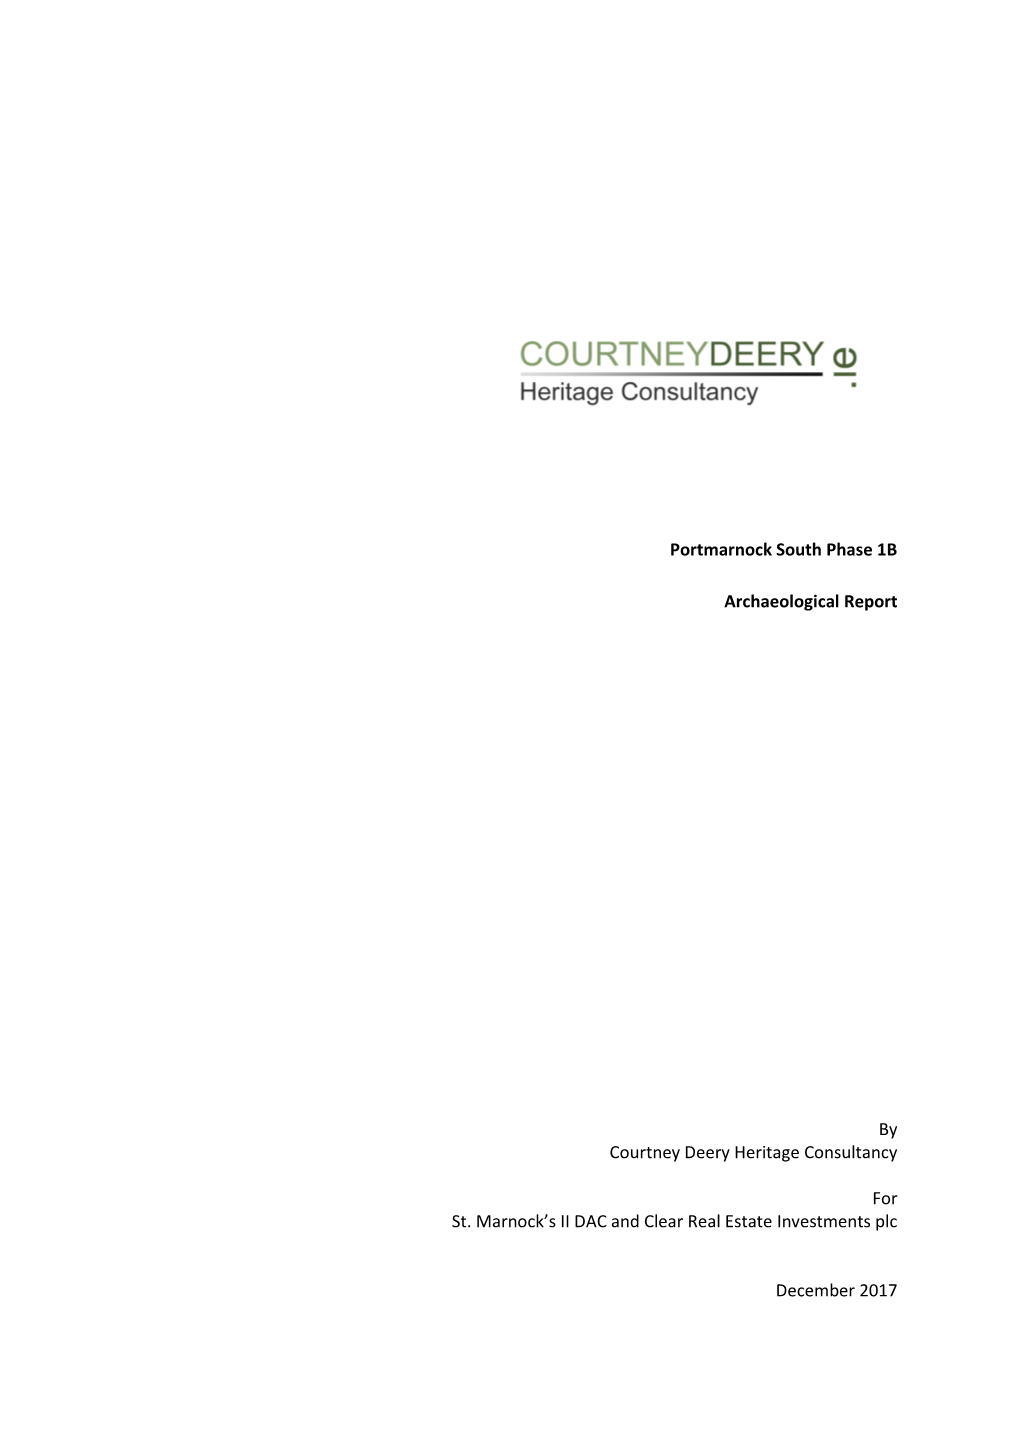 Portmarnock South Phase 1B Archaeological Report by Courtney